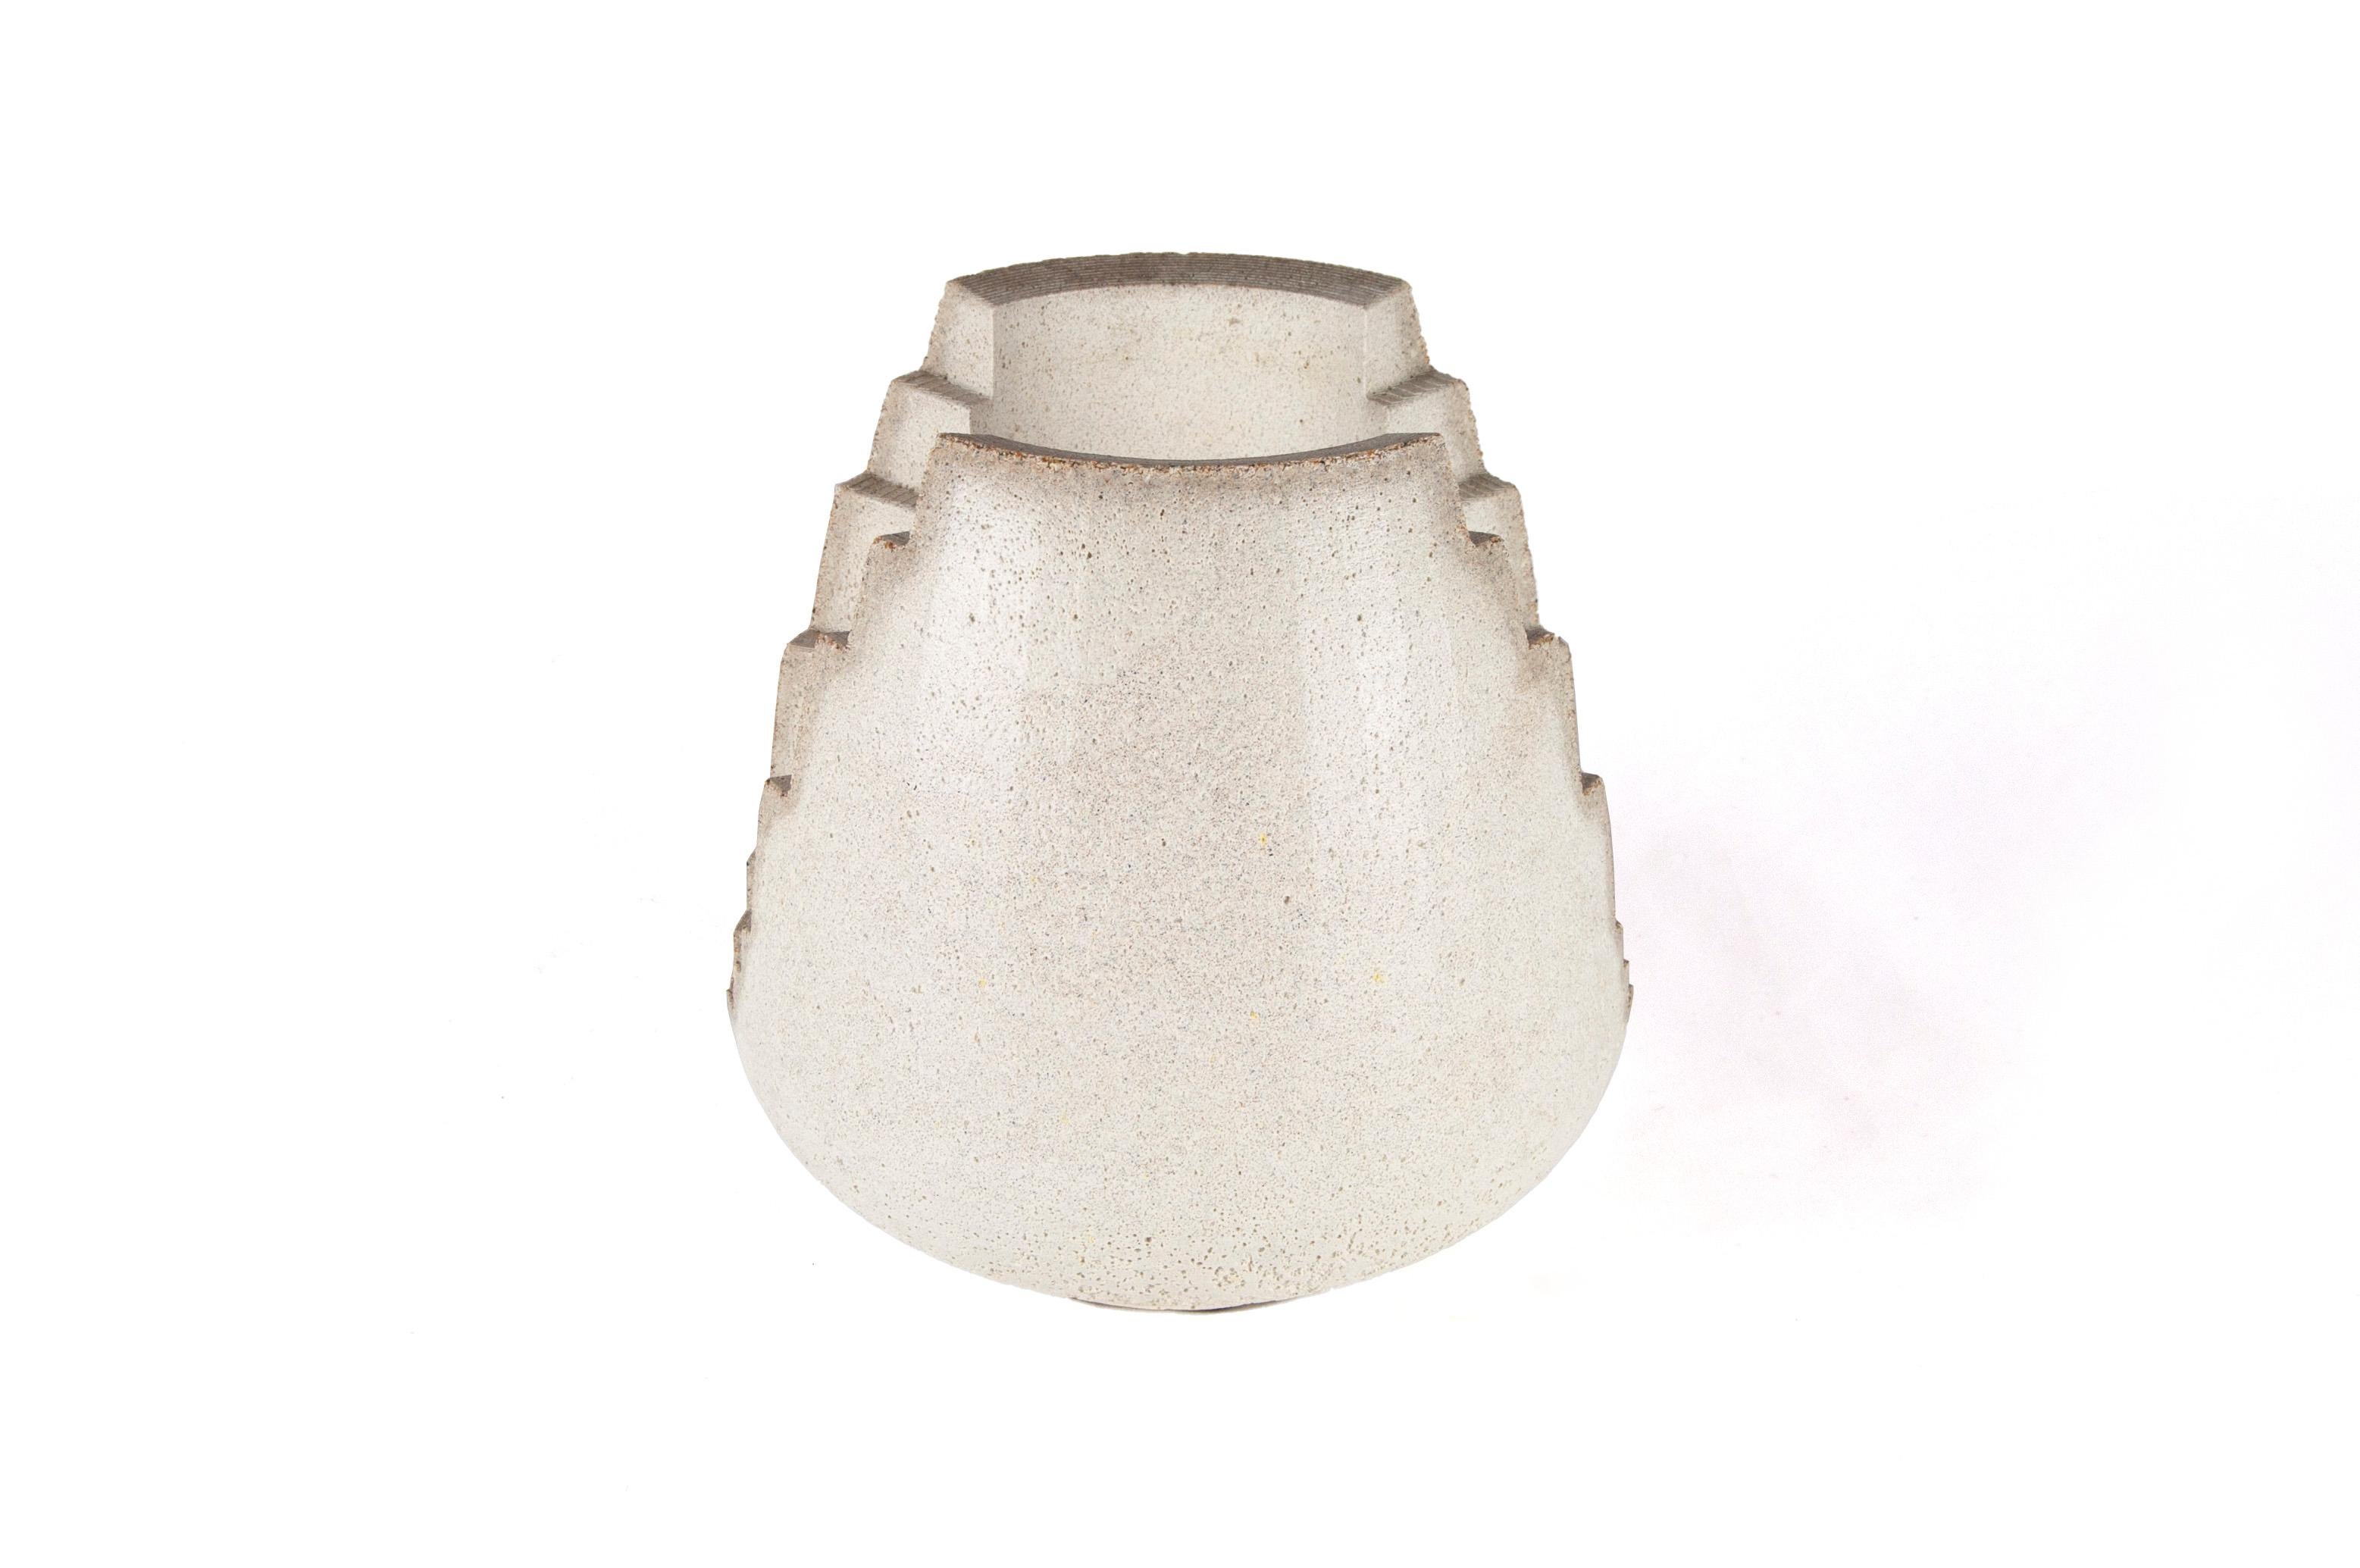 Brutalist Concrete Candle Lanterns, Set of 3, White In New Condition For Sale In Camp Meeker, CA